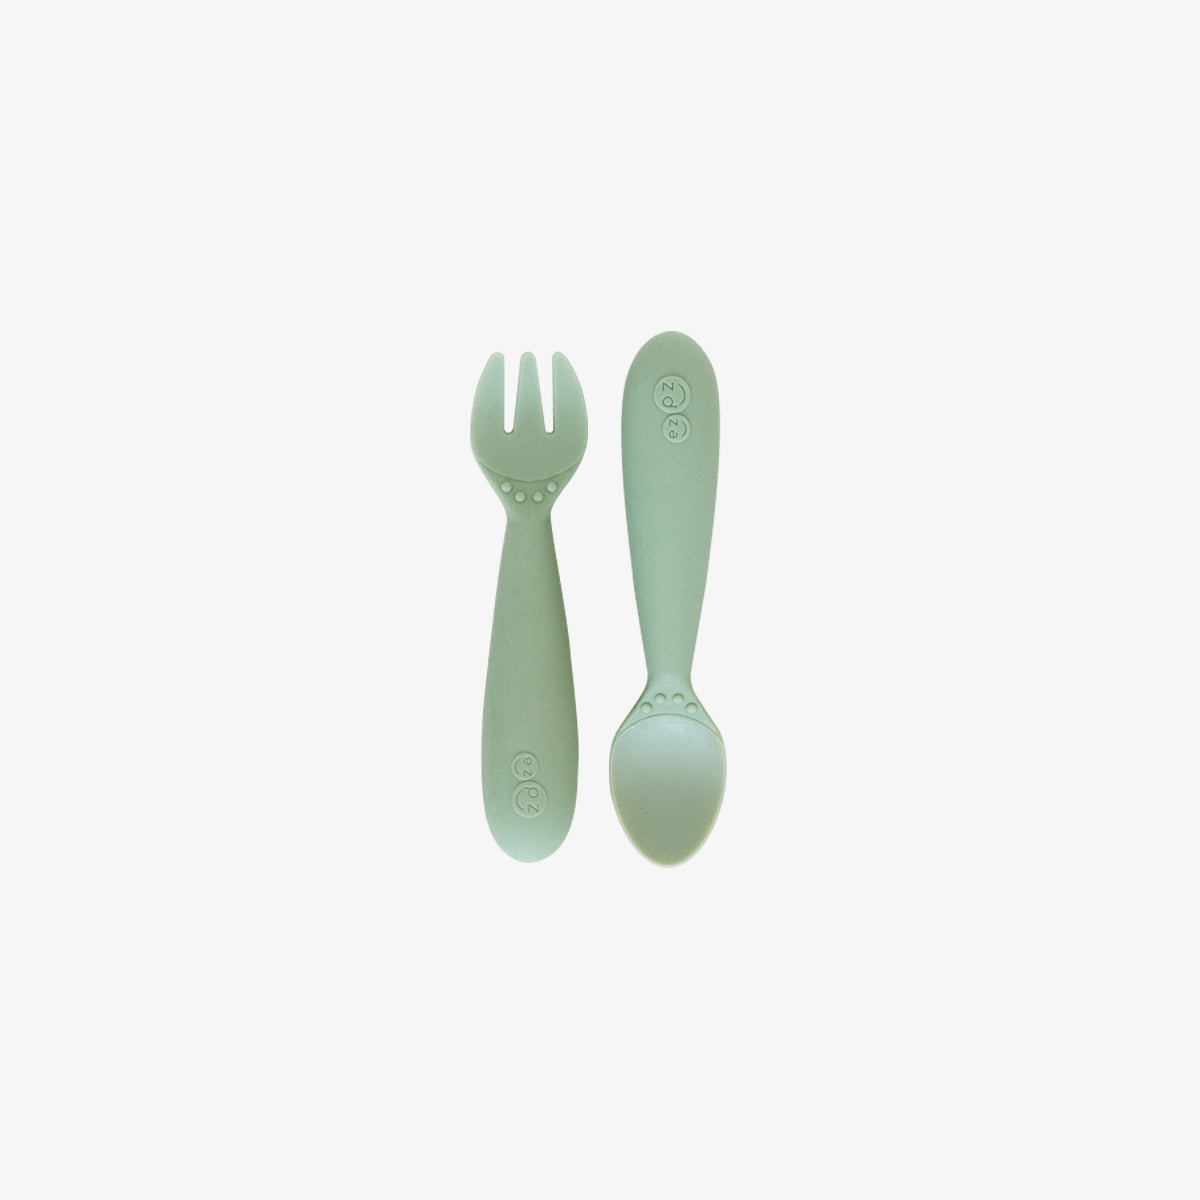 Mini Utensils in Sage by ezpz / Sensory Silicone Fork & Spoon for Toddlers